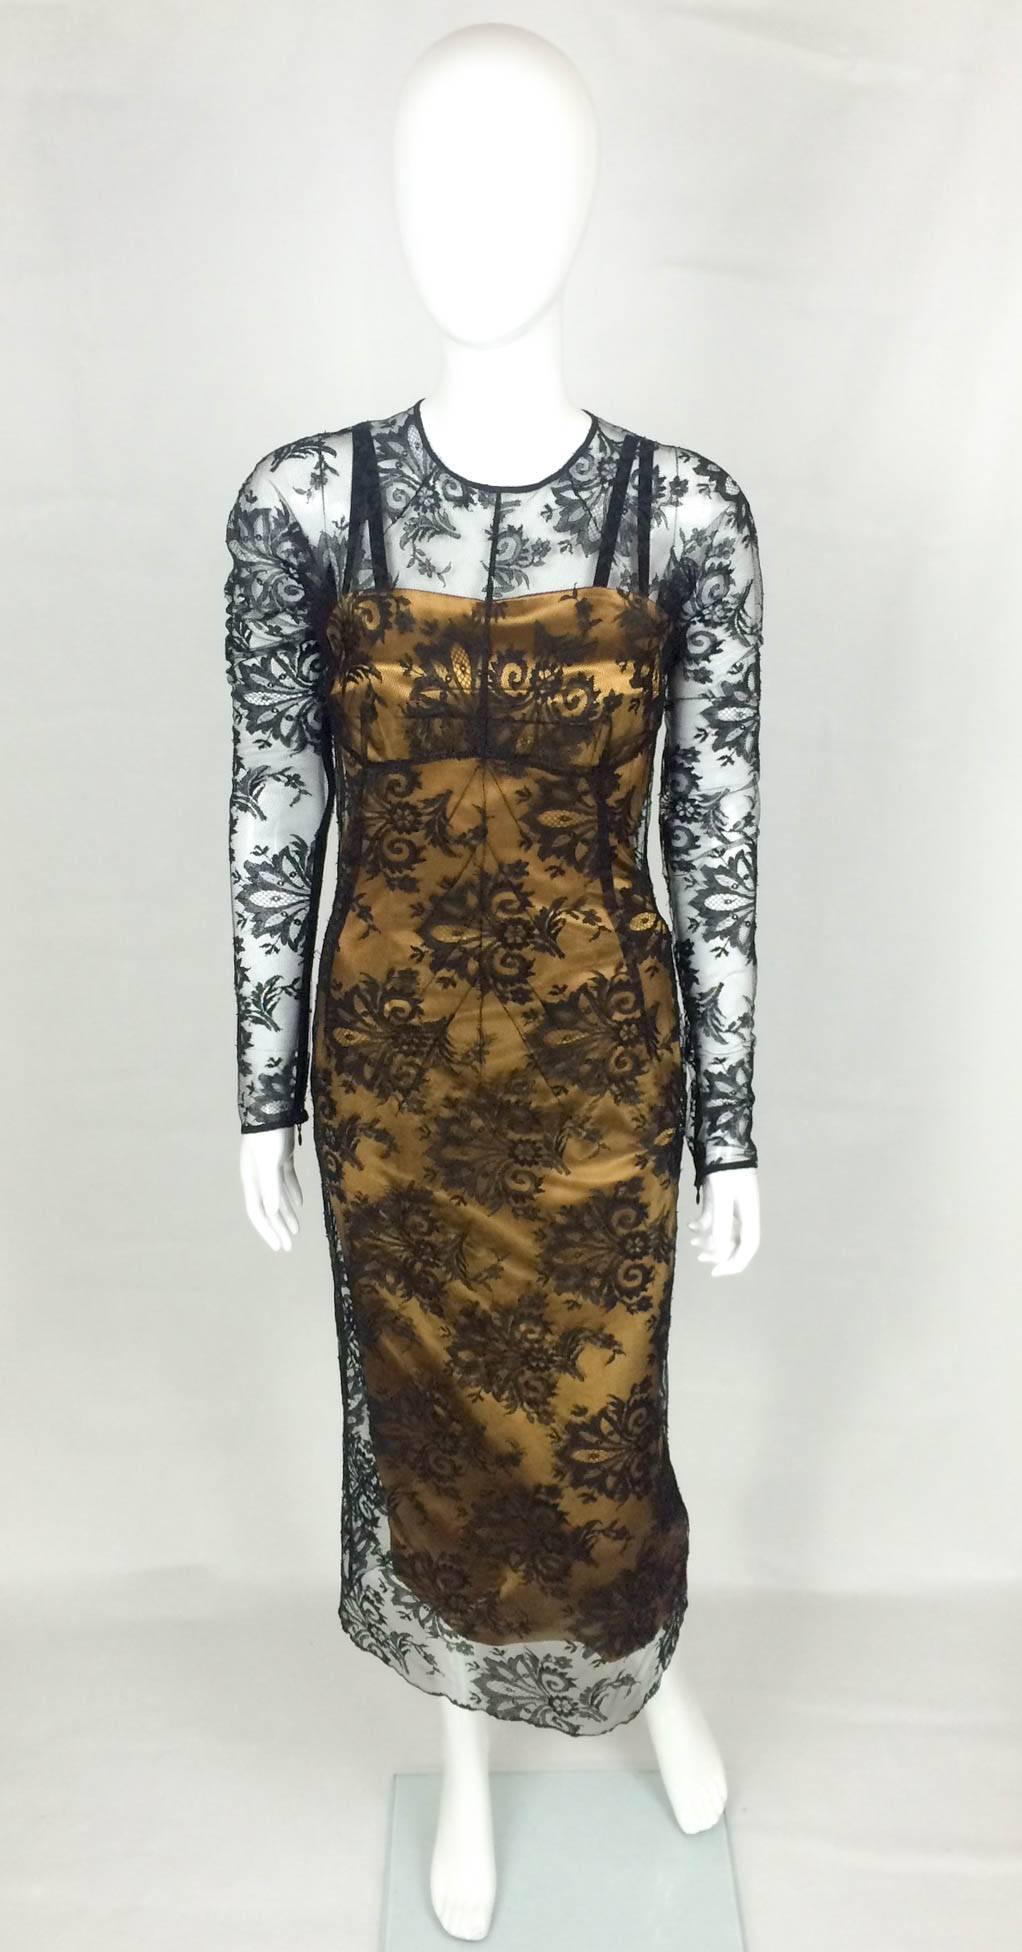 Gorgeous Dolce and Gabbana 2-Piece Dress. This sexy dress is made of two pieces: the underneath bronze sheath dress (fitted, body-hugging) and will accentuate the curves and give a great silhouette (lined); on top, the long sleeves black lace brings